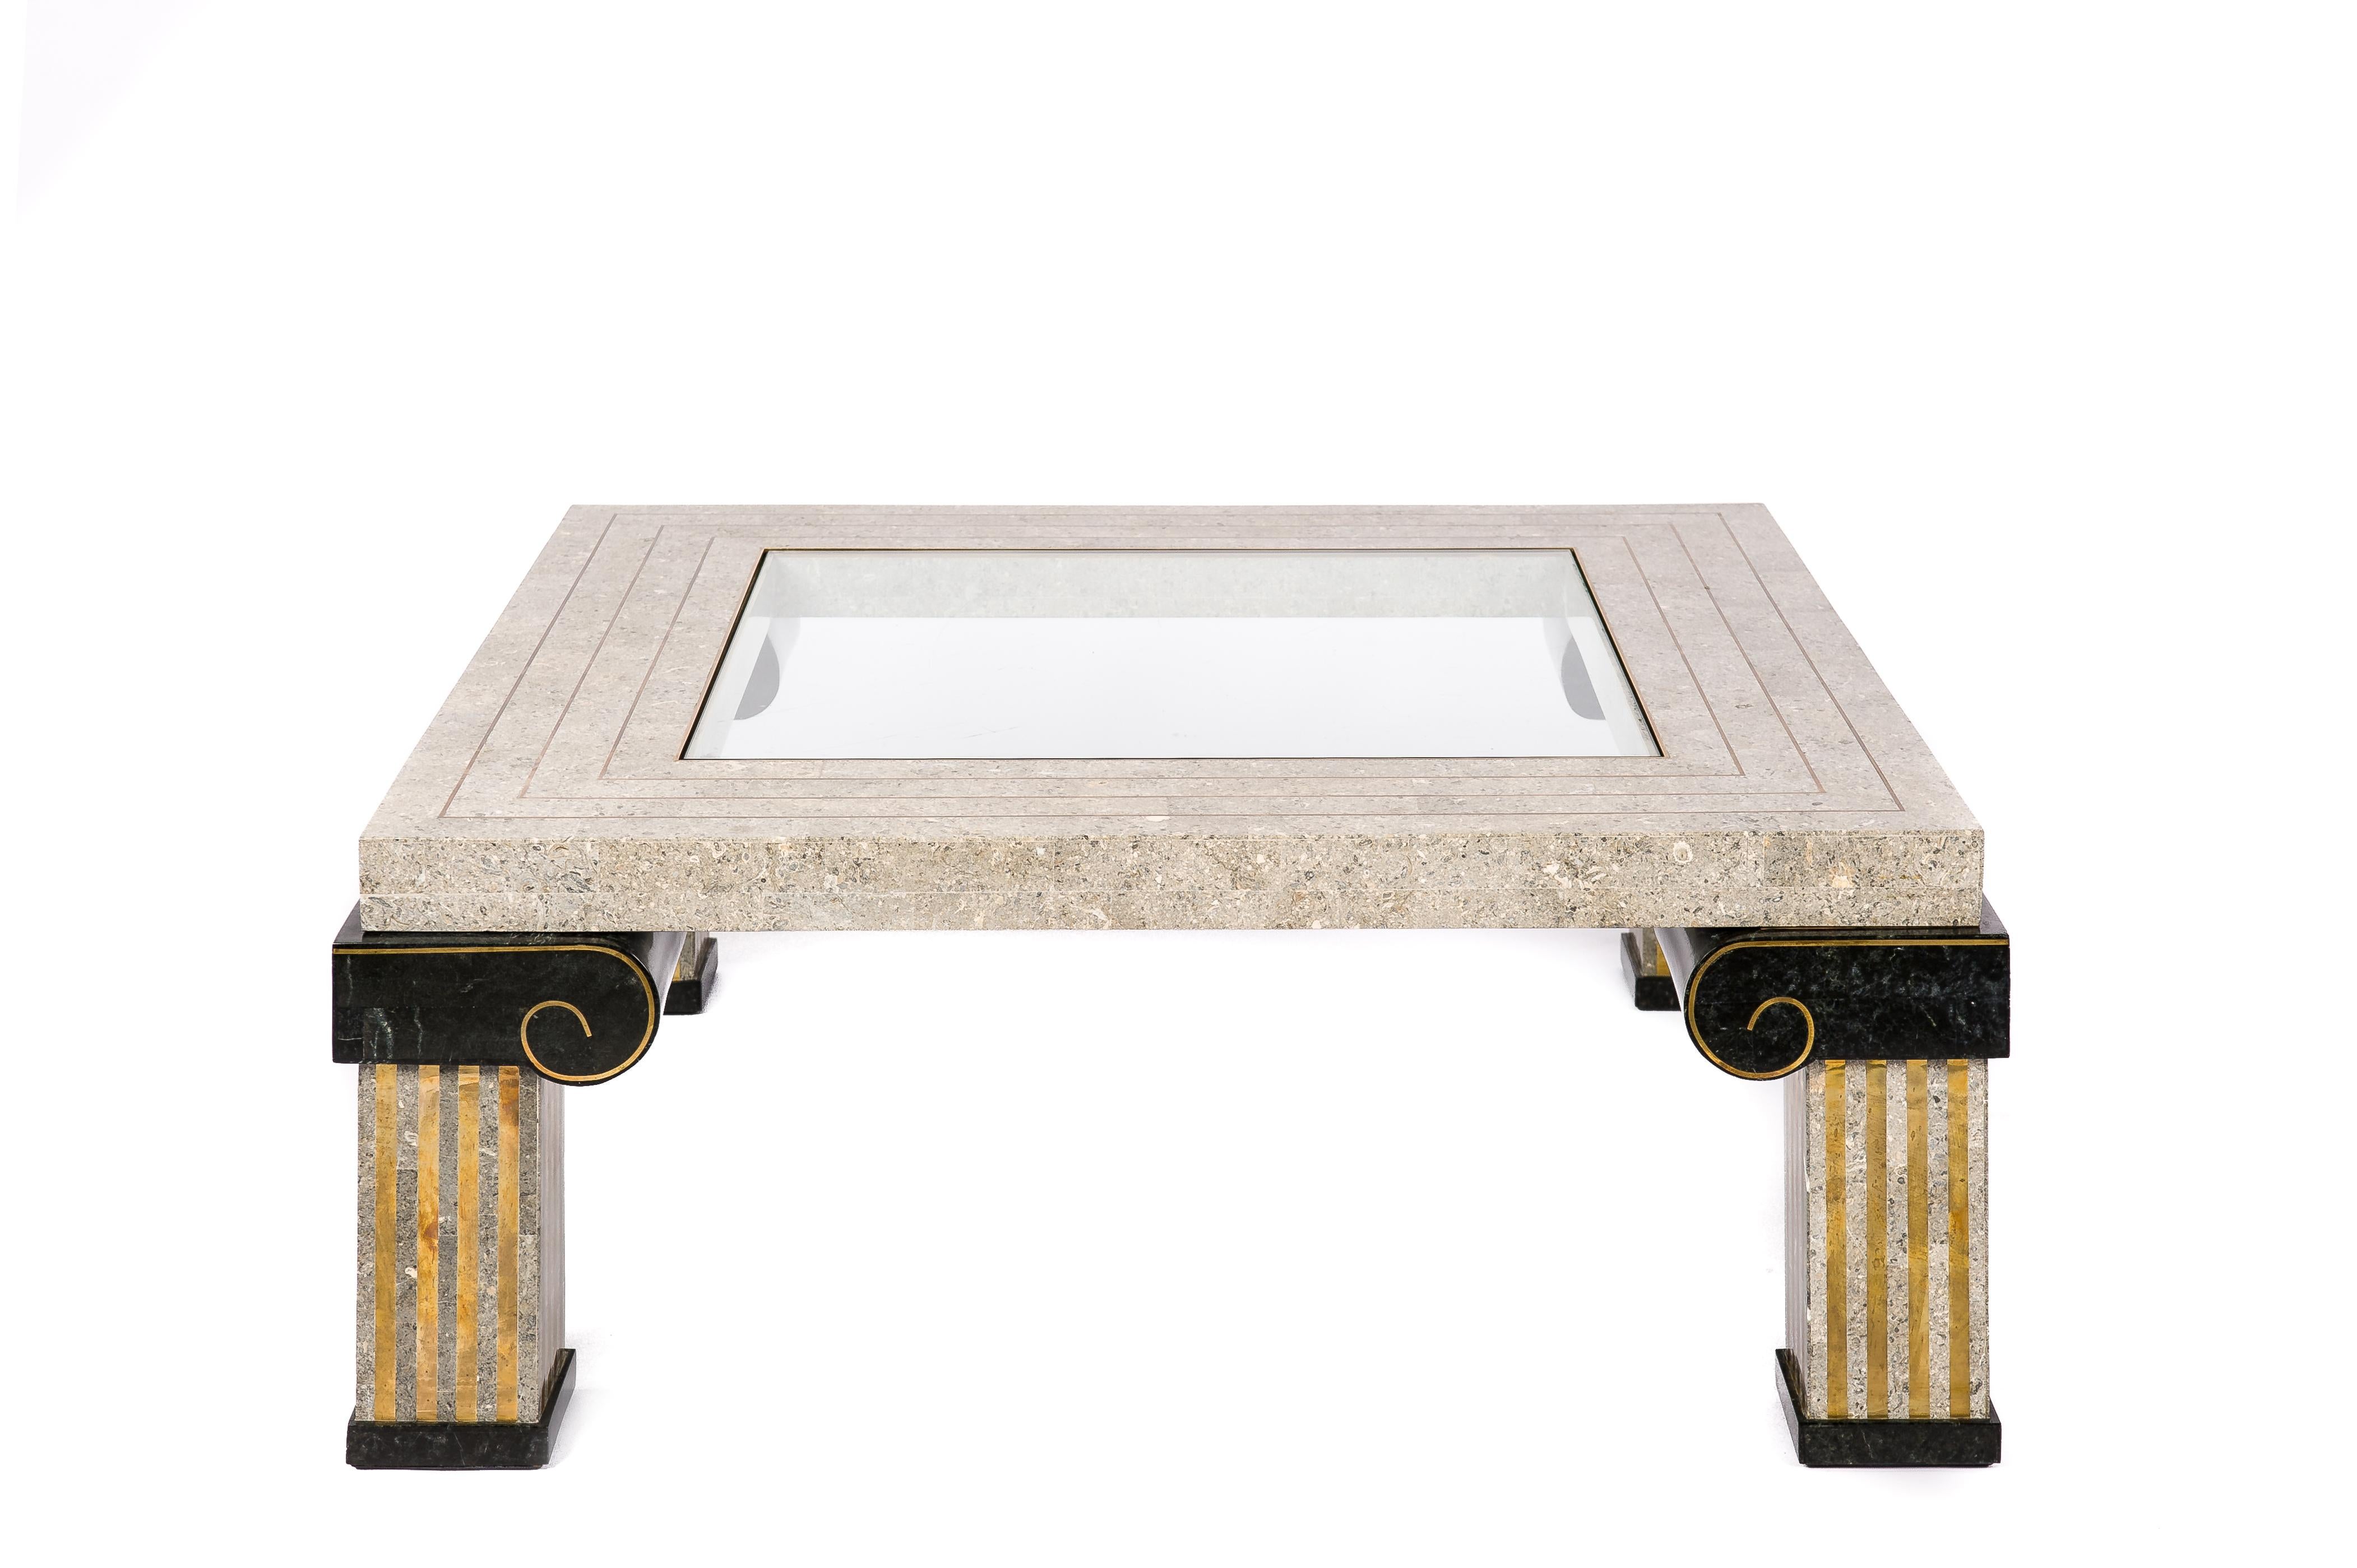 Neoclassical Classic Tesselated Fossil Stone and Inlaid Brass Coffee Table by Maitland Smith For Sale